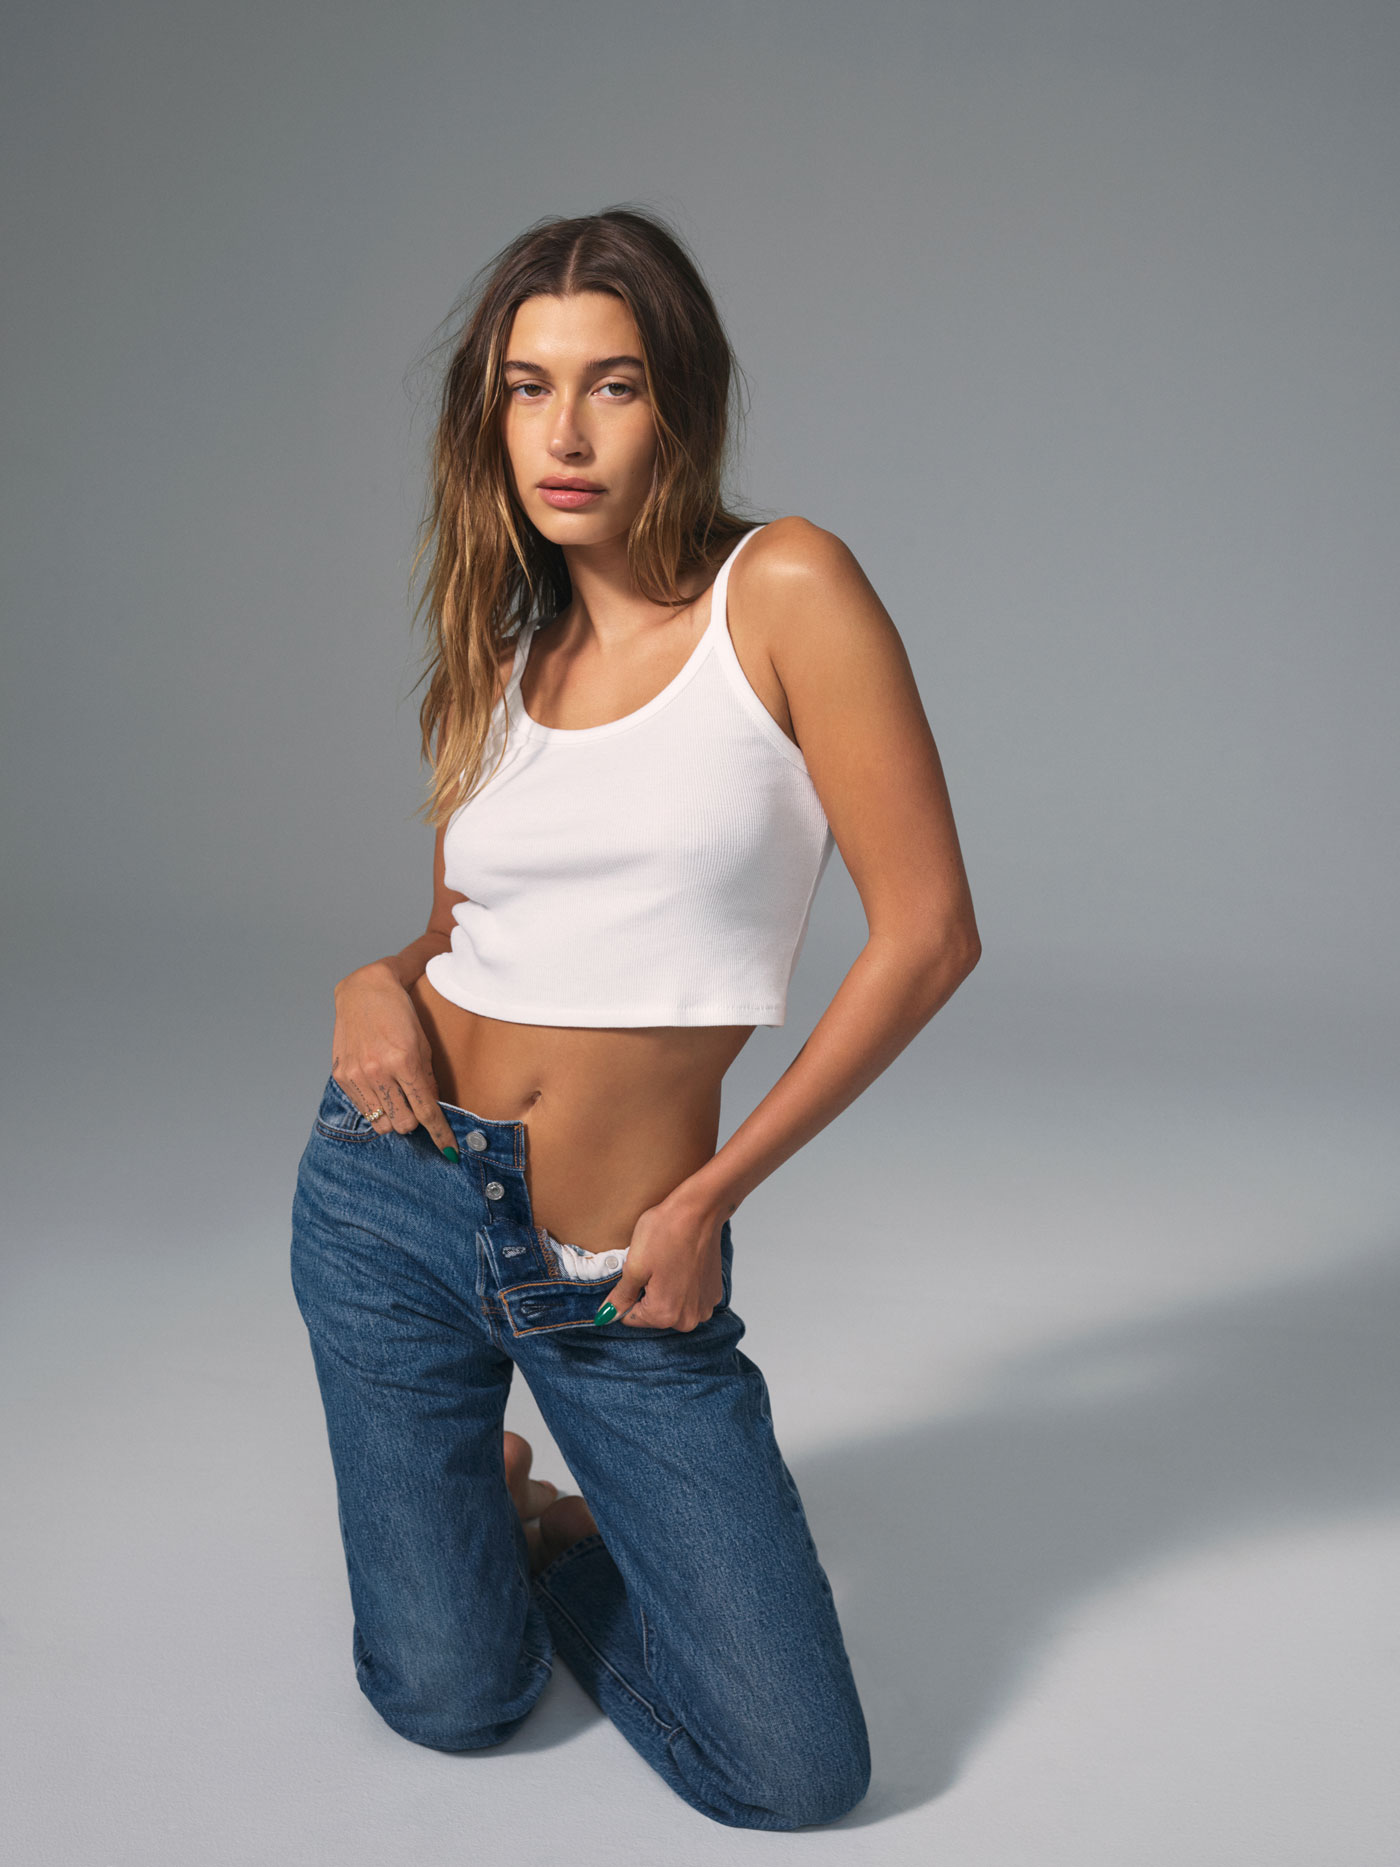 Hailey Bieber Is Already Wearing Brand-New Levi's 501 Jeans | Who What Wear